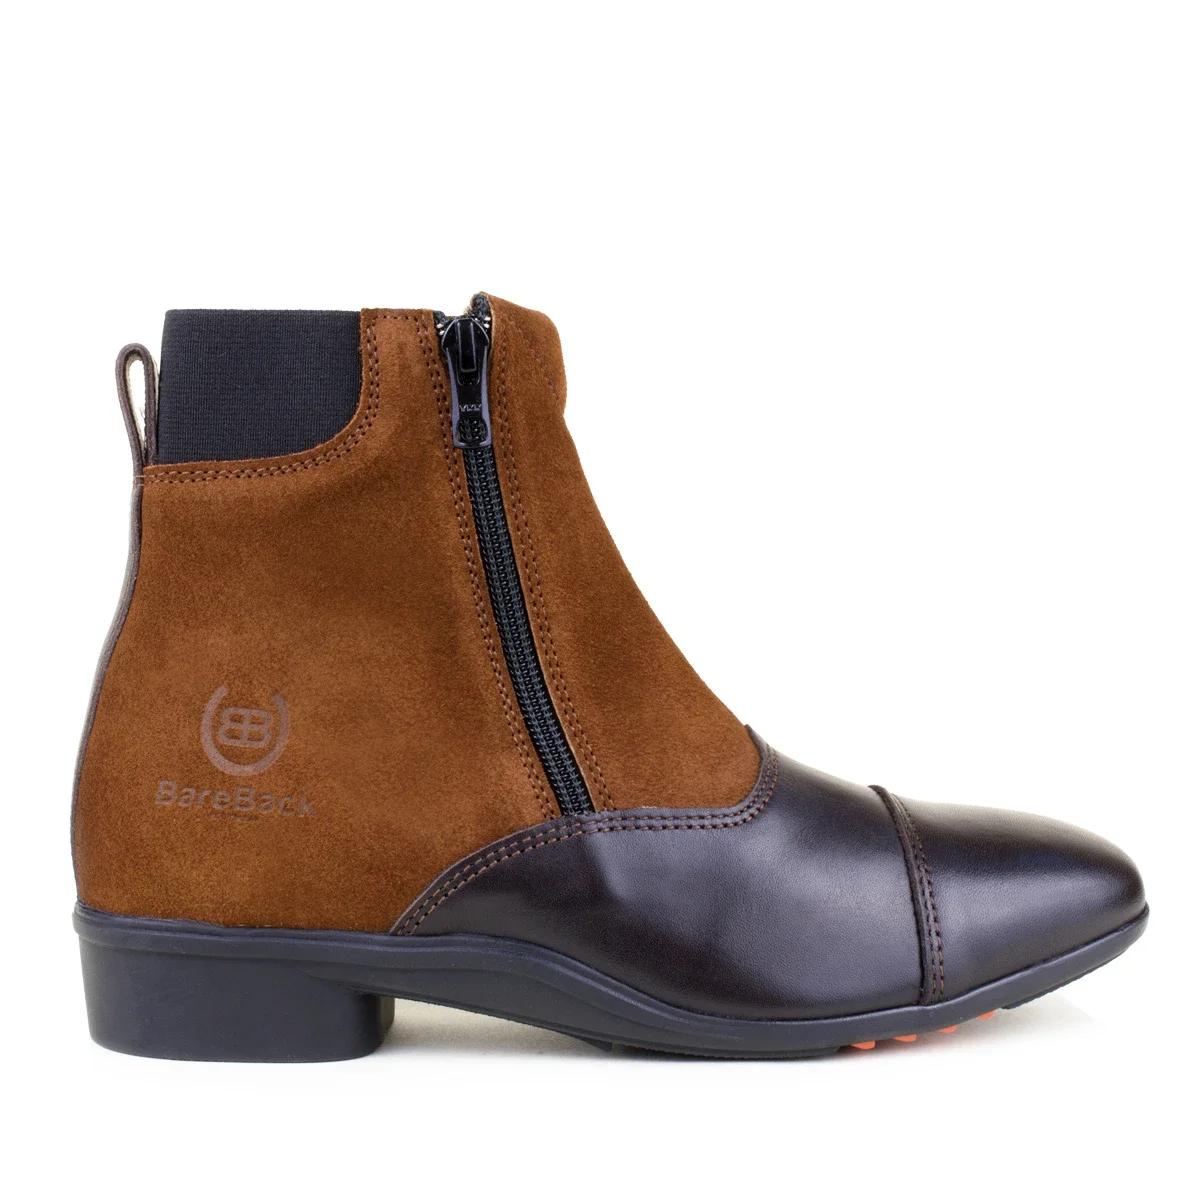 Bareback Footwear - Comfortable Country & Riding Boots - Free Returns